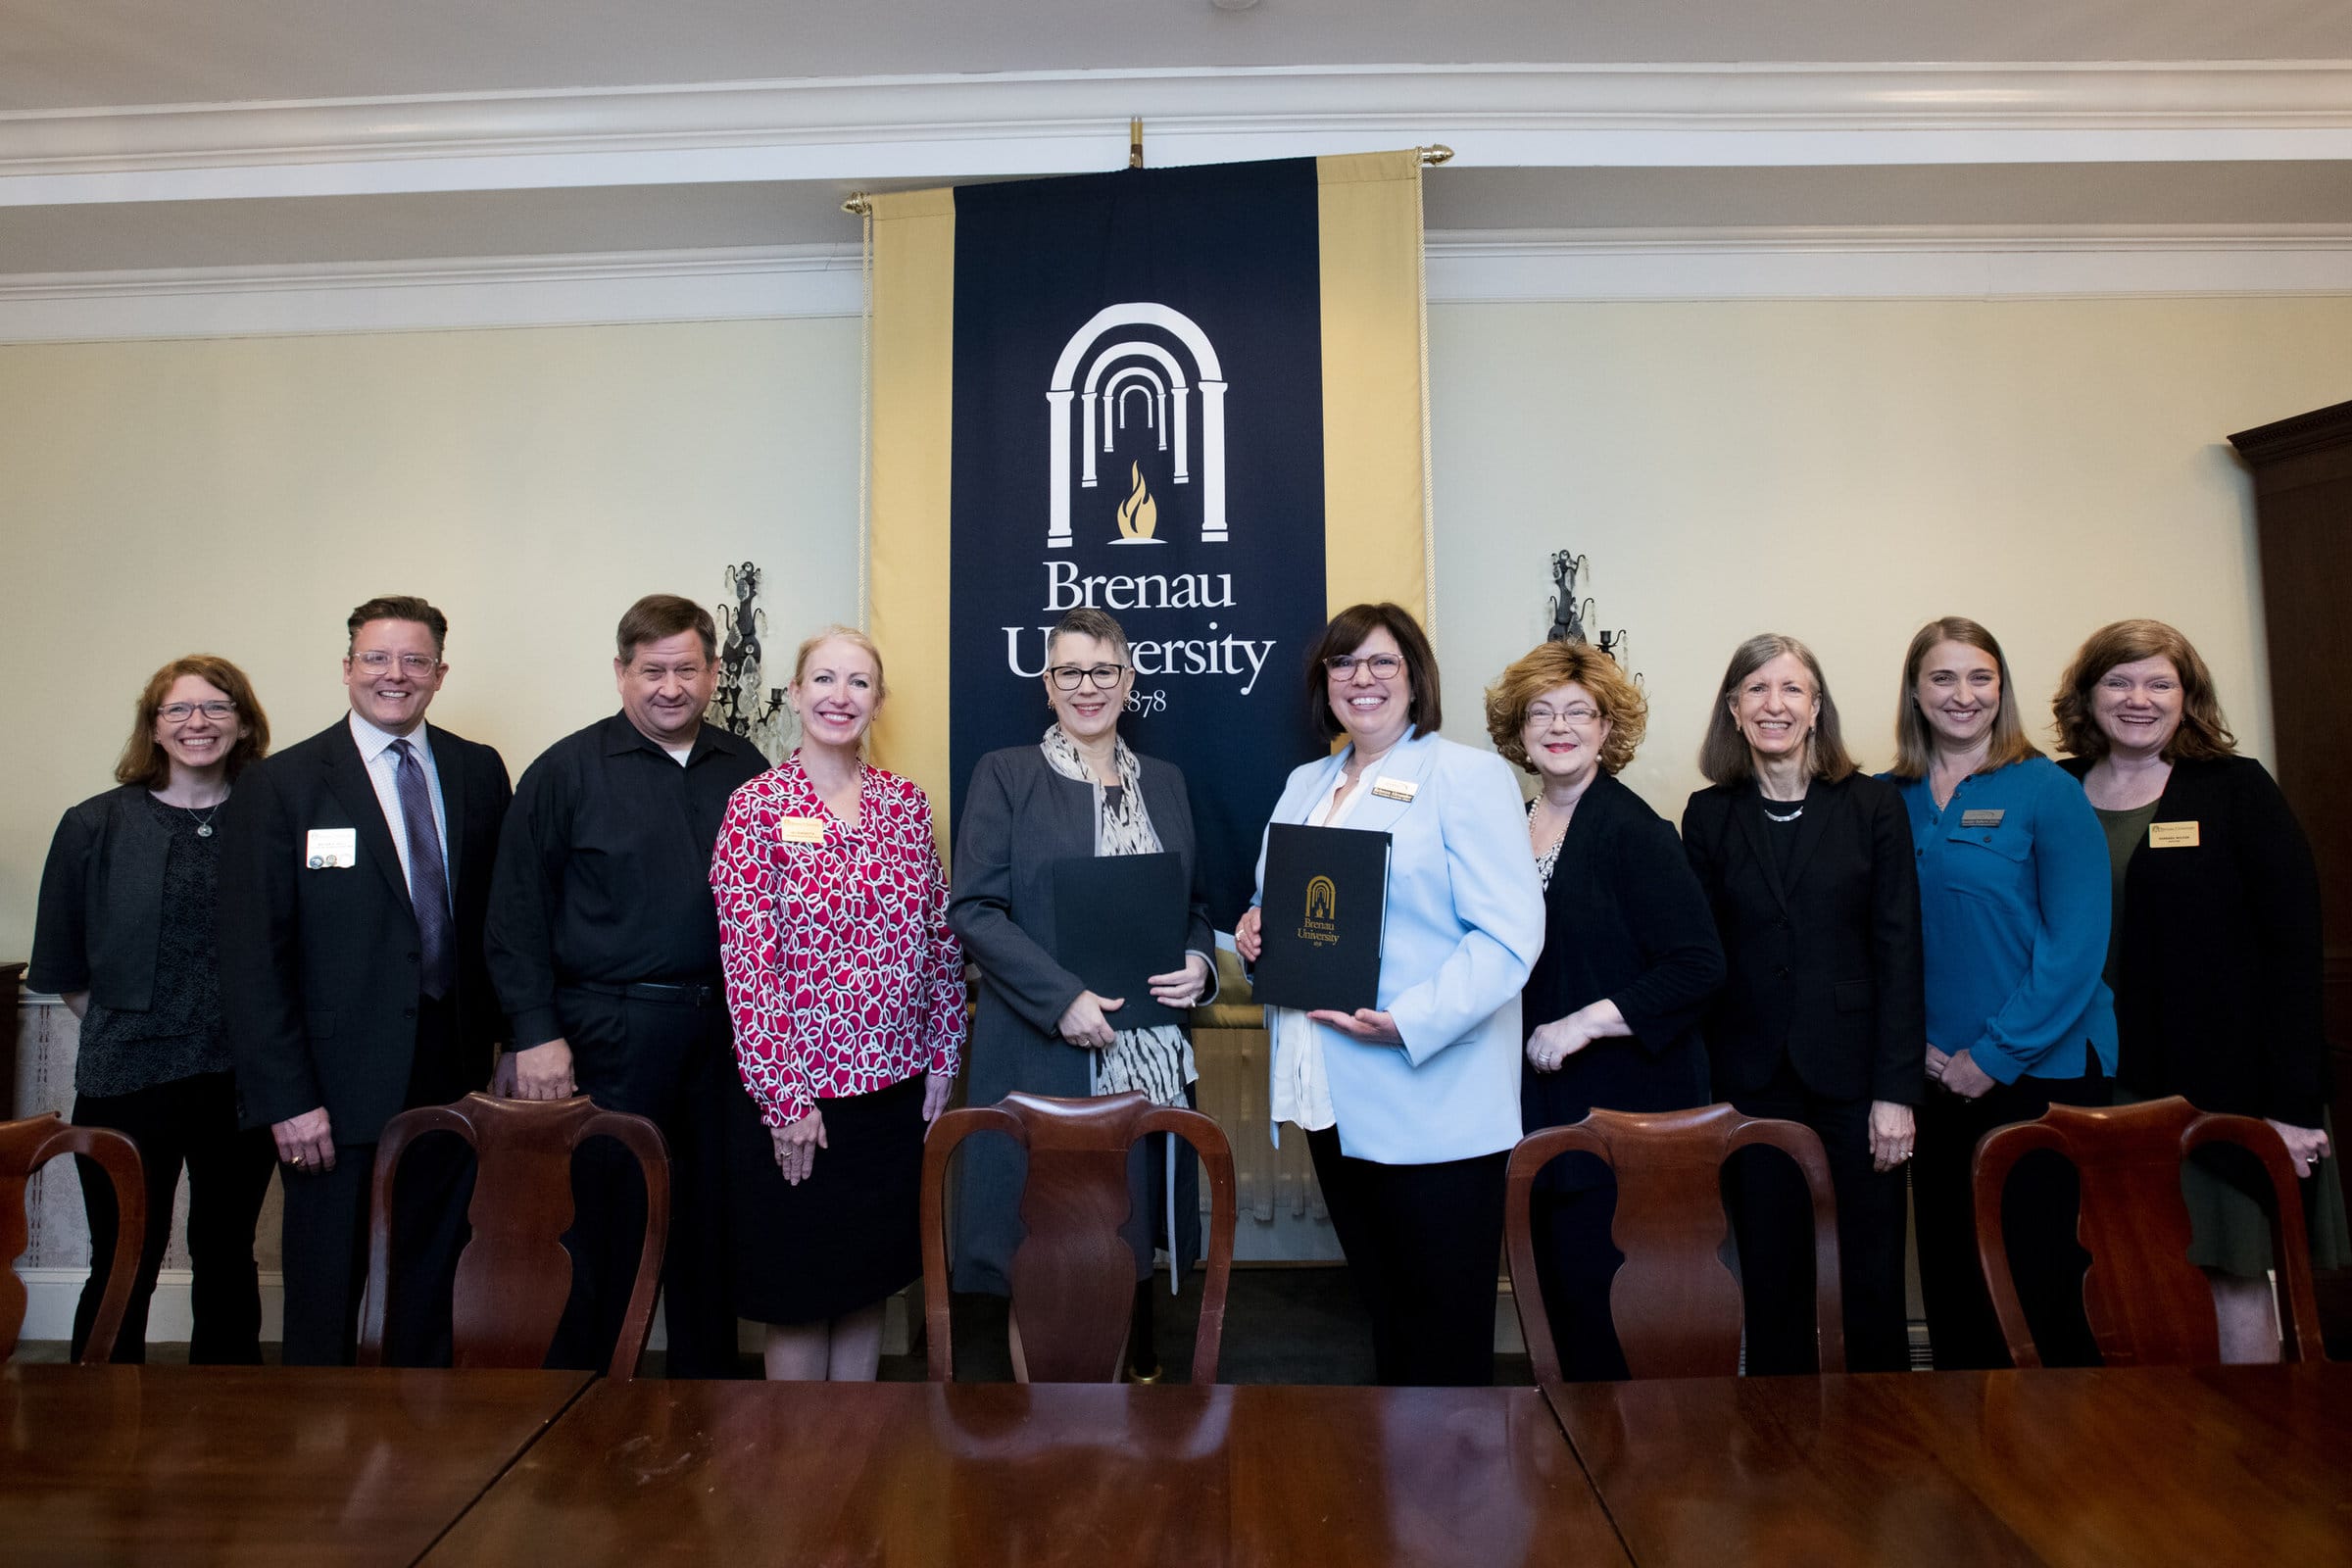 All of those involved in coordinating the articulation agreement between Brenau and Gwinnett Technical College